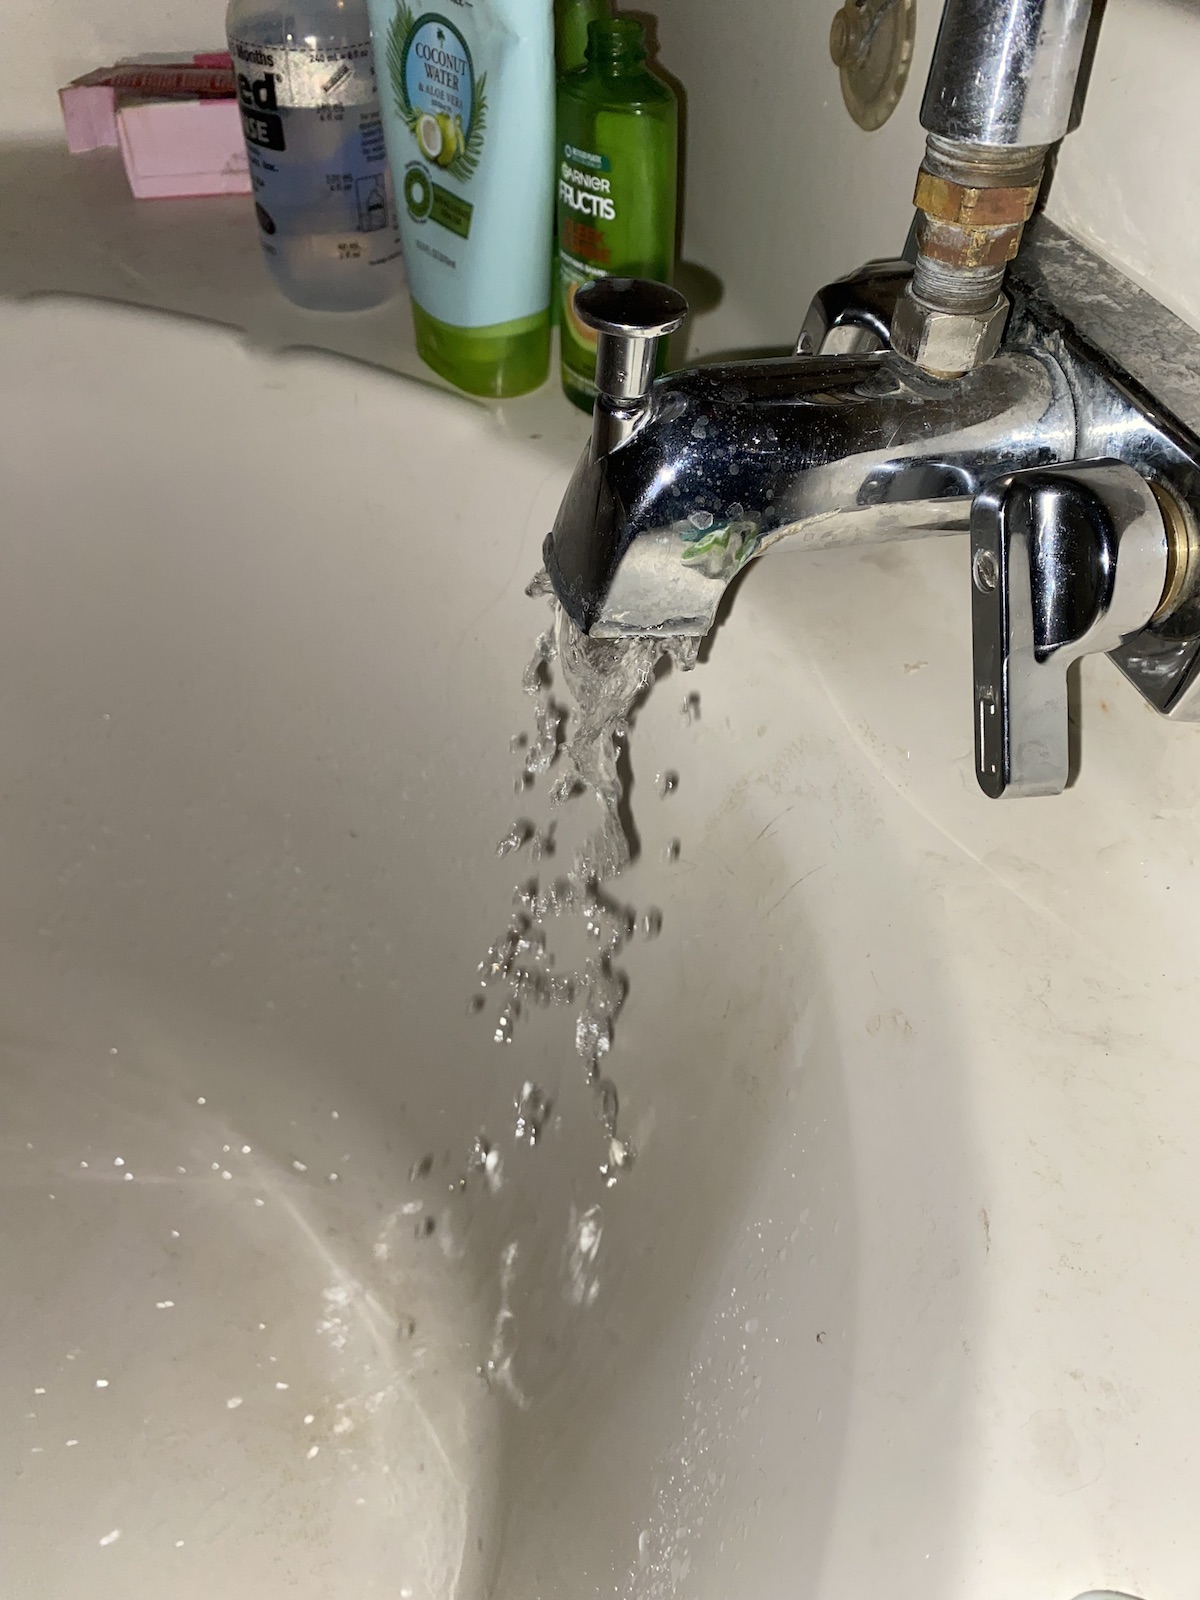 Photo of a running bathroom faucet